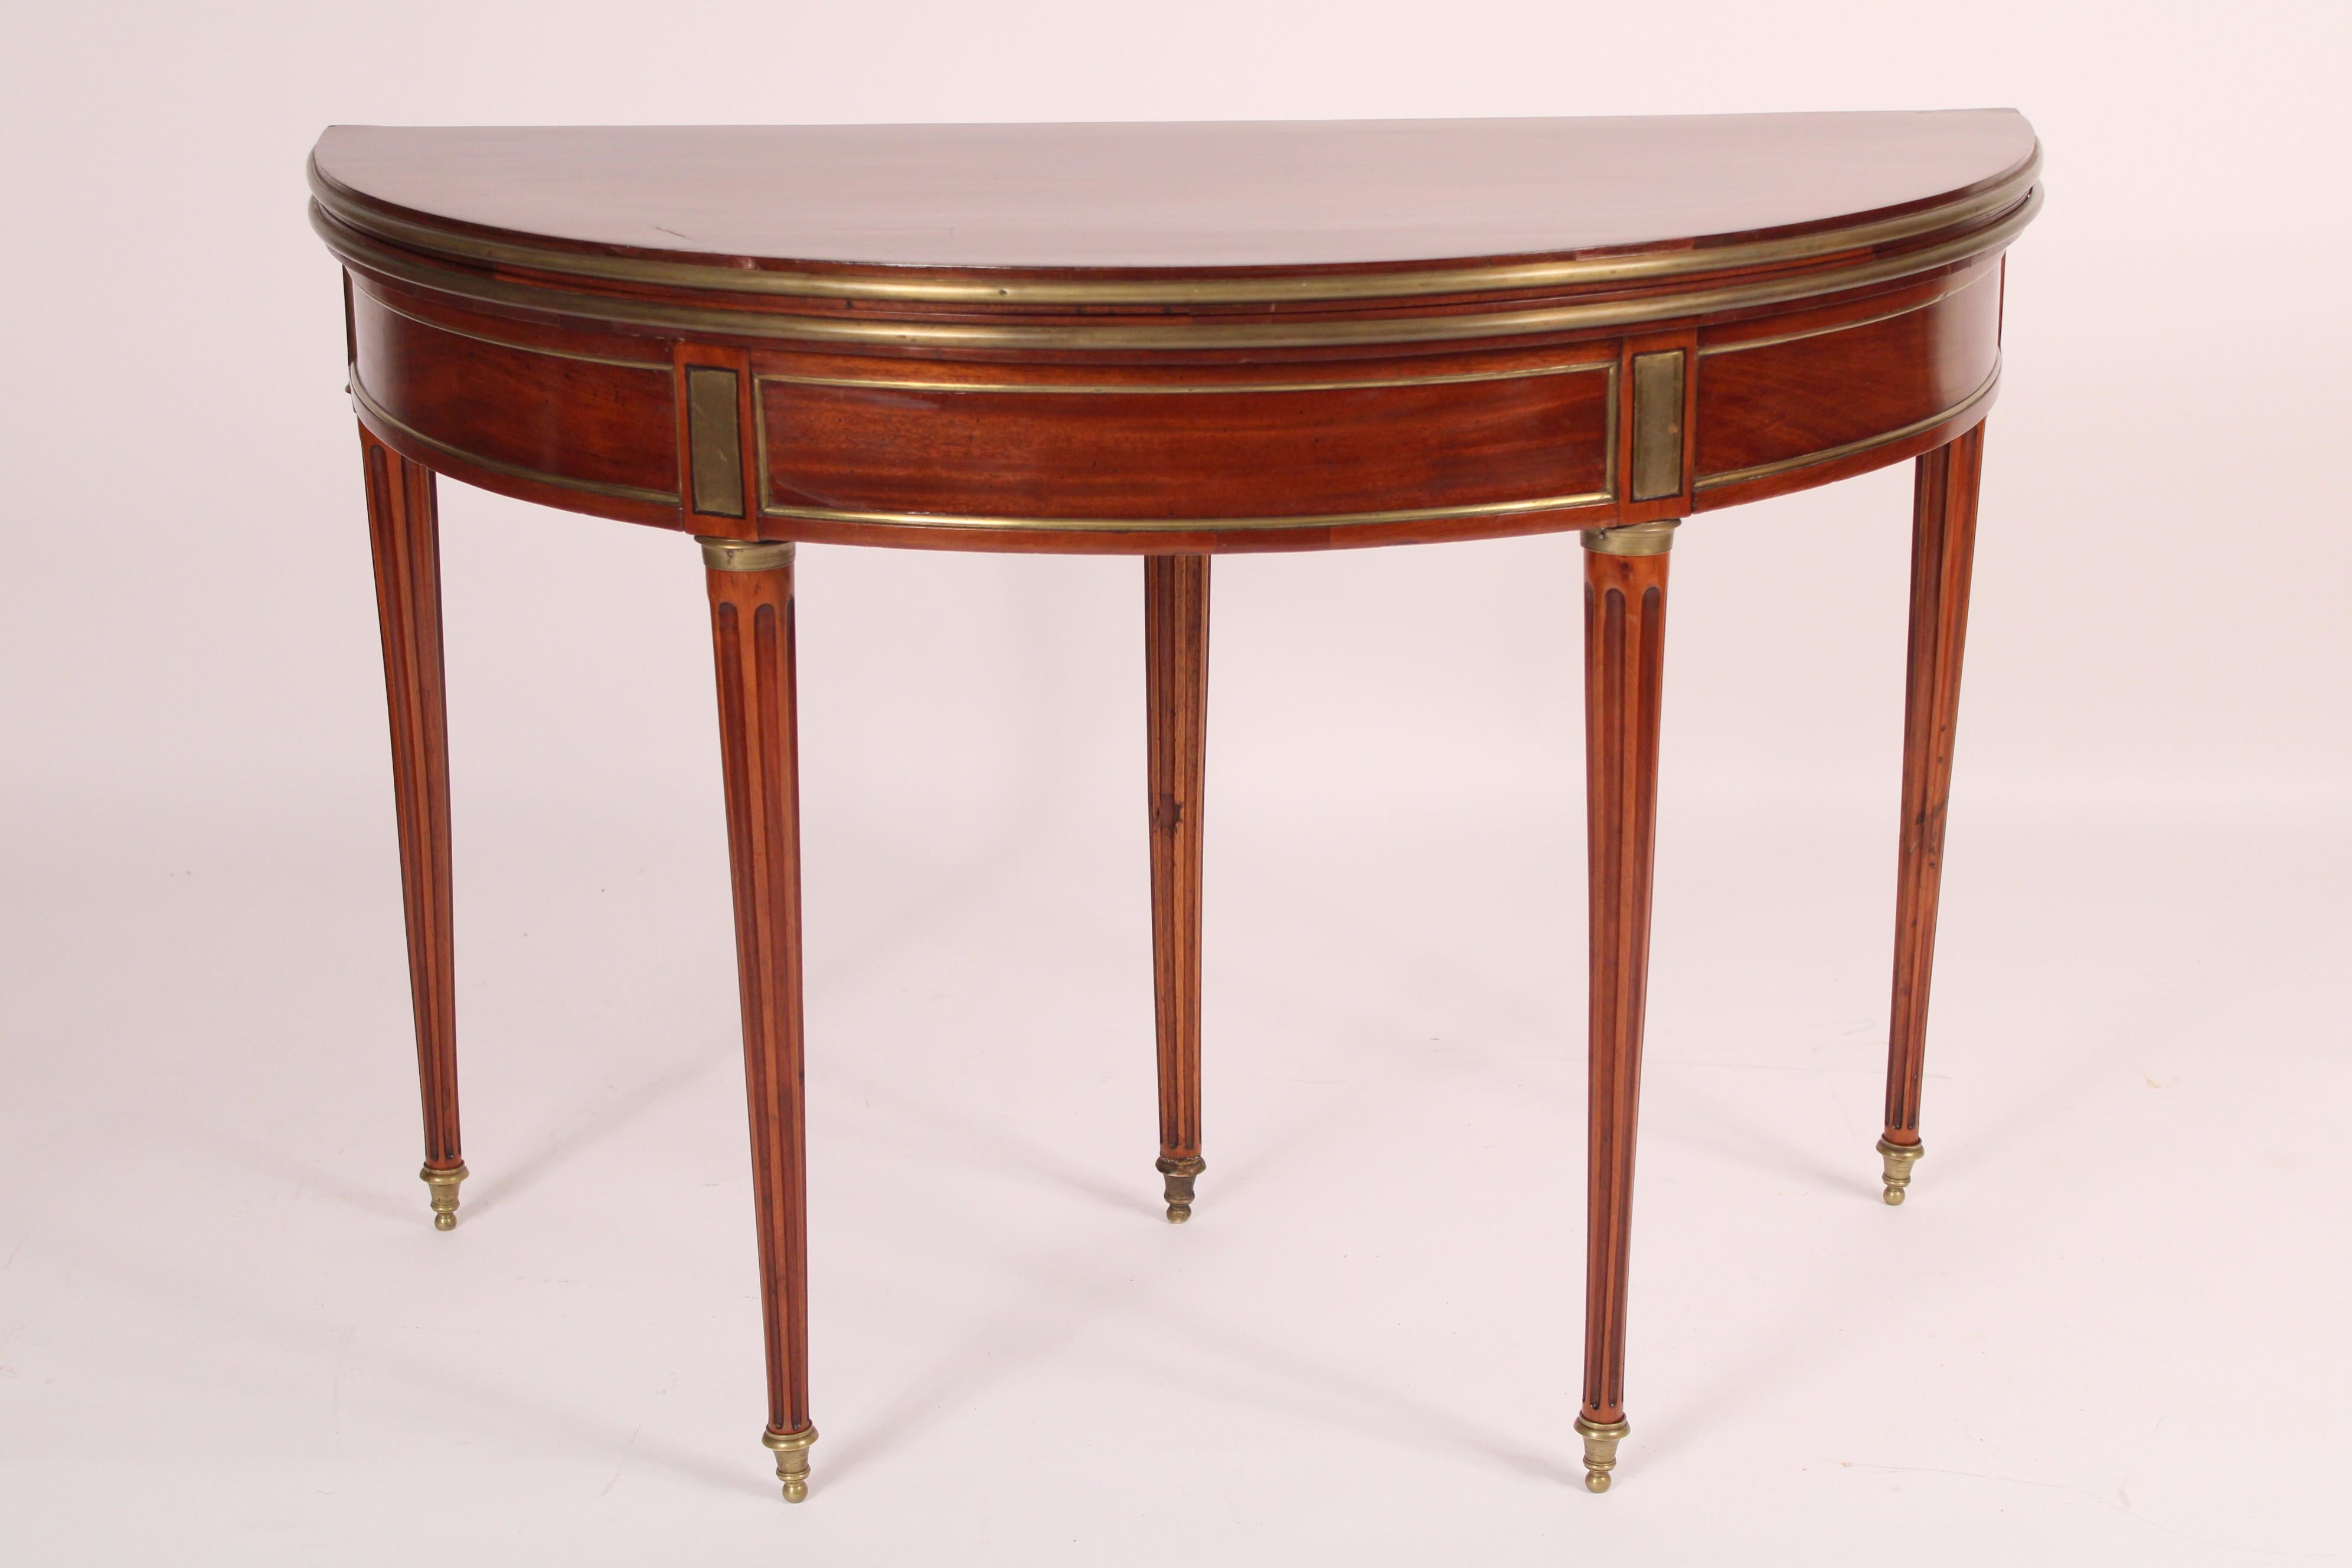 Antique Louis XVI style mahogany brass mounted demi lune games table, late 19th century, stamped Jansen. With a demi lune mahogany top with brass mounted edges, a demi lune frieze with 3 mahogany panels with brass frames, underside of frieze stamped